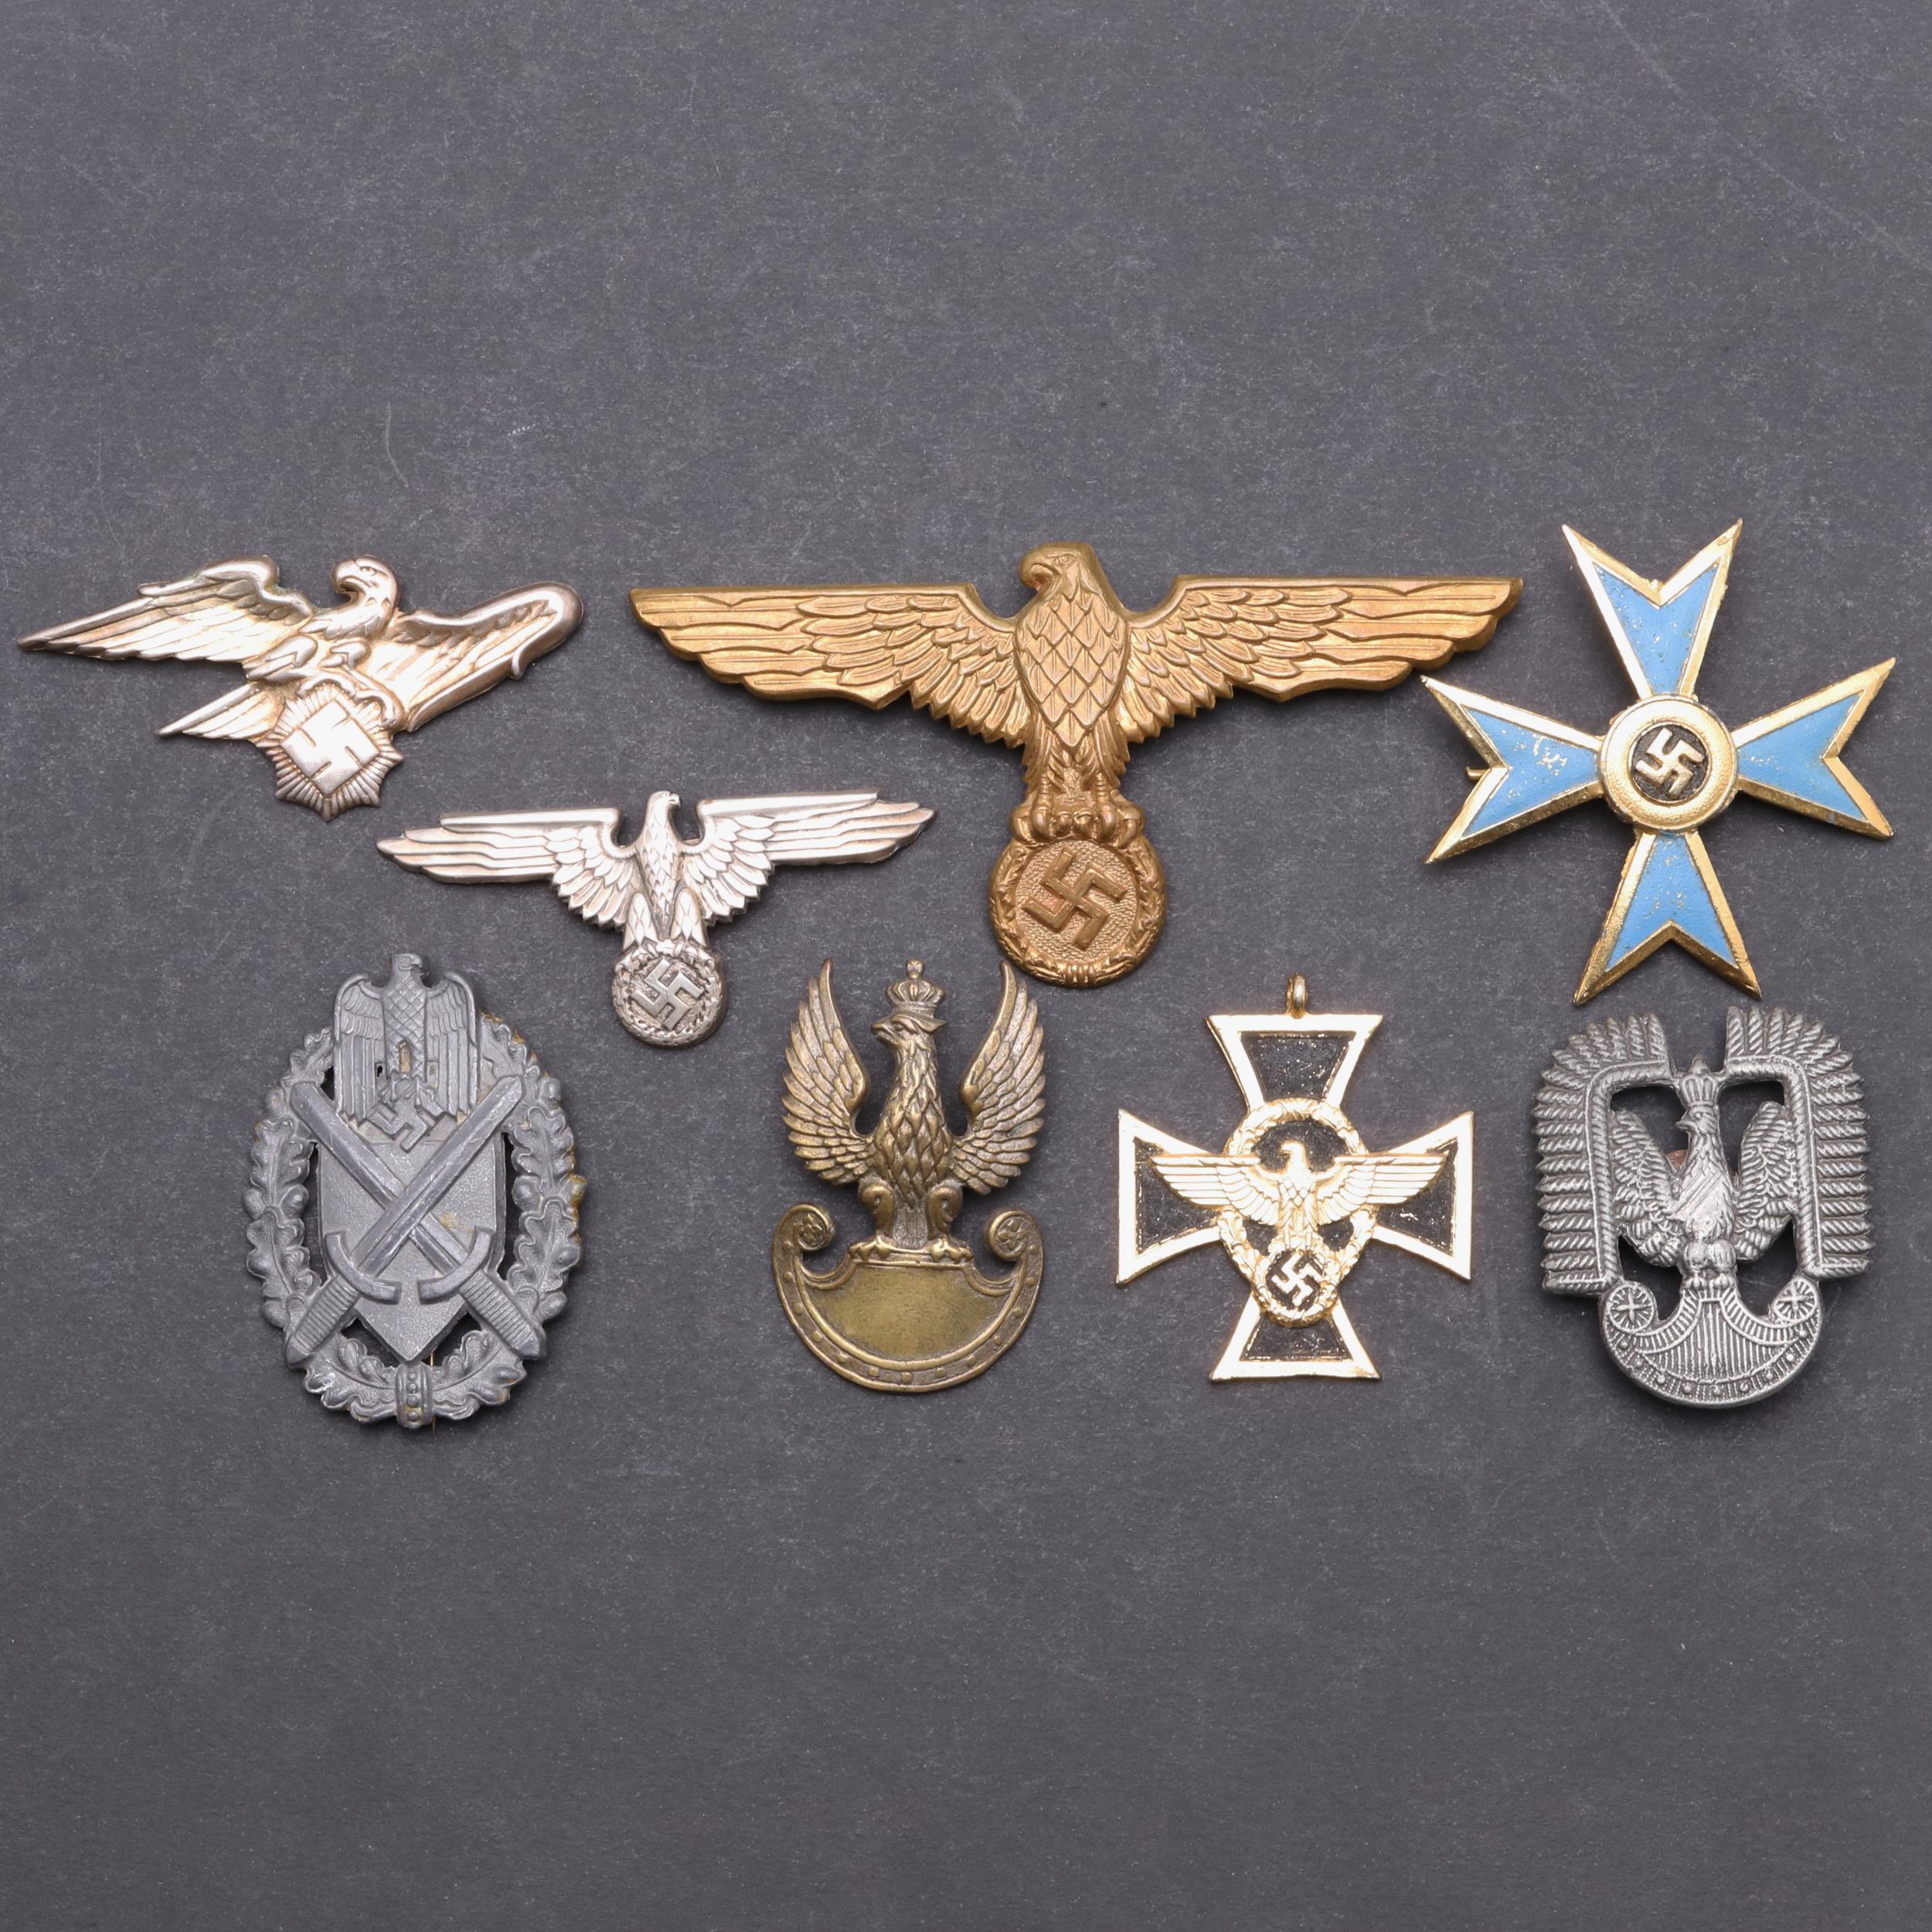 A SECOND WORLD WAR GERMAN MARKSMAN'S BADGE AND OTHERS SIMILAR. - Image 2 of 10